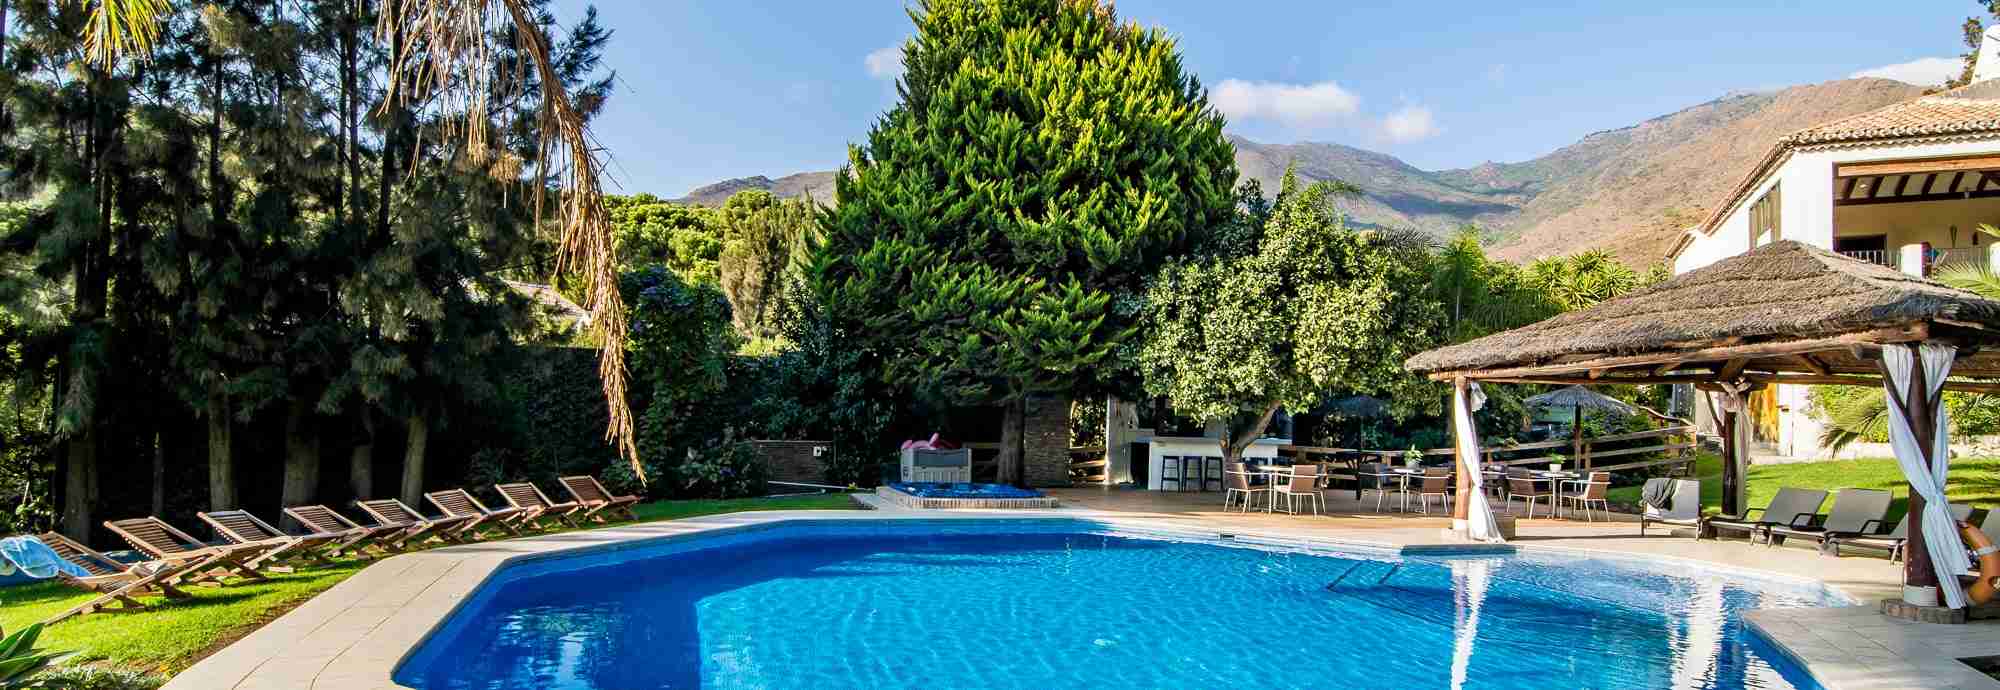 First class classic luxury holiday villa in Andalucia beauty spot